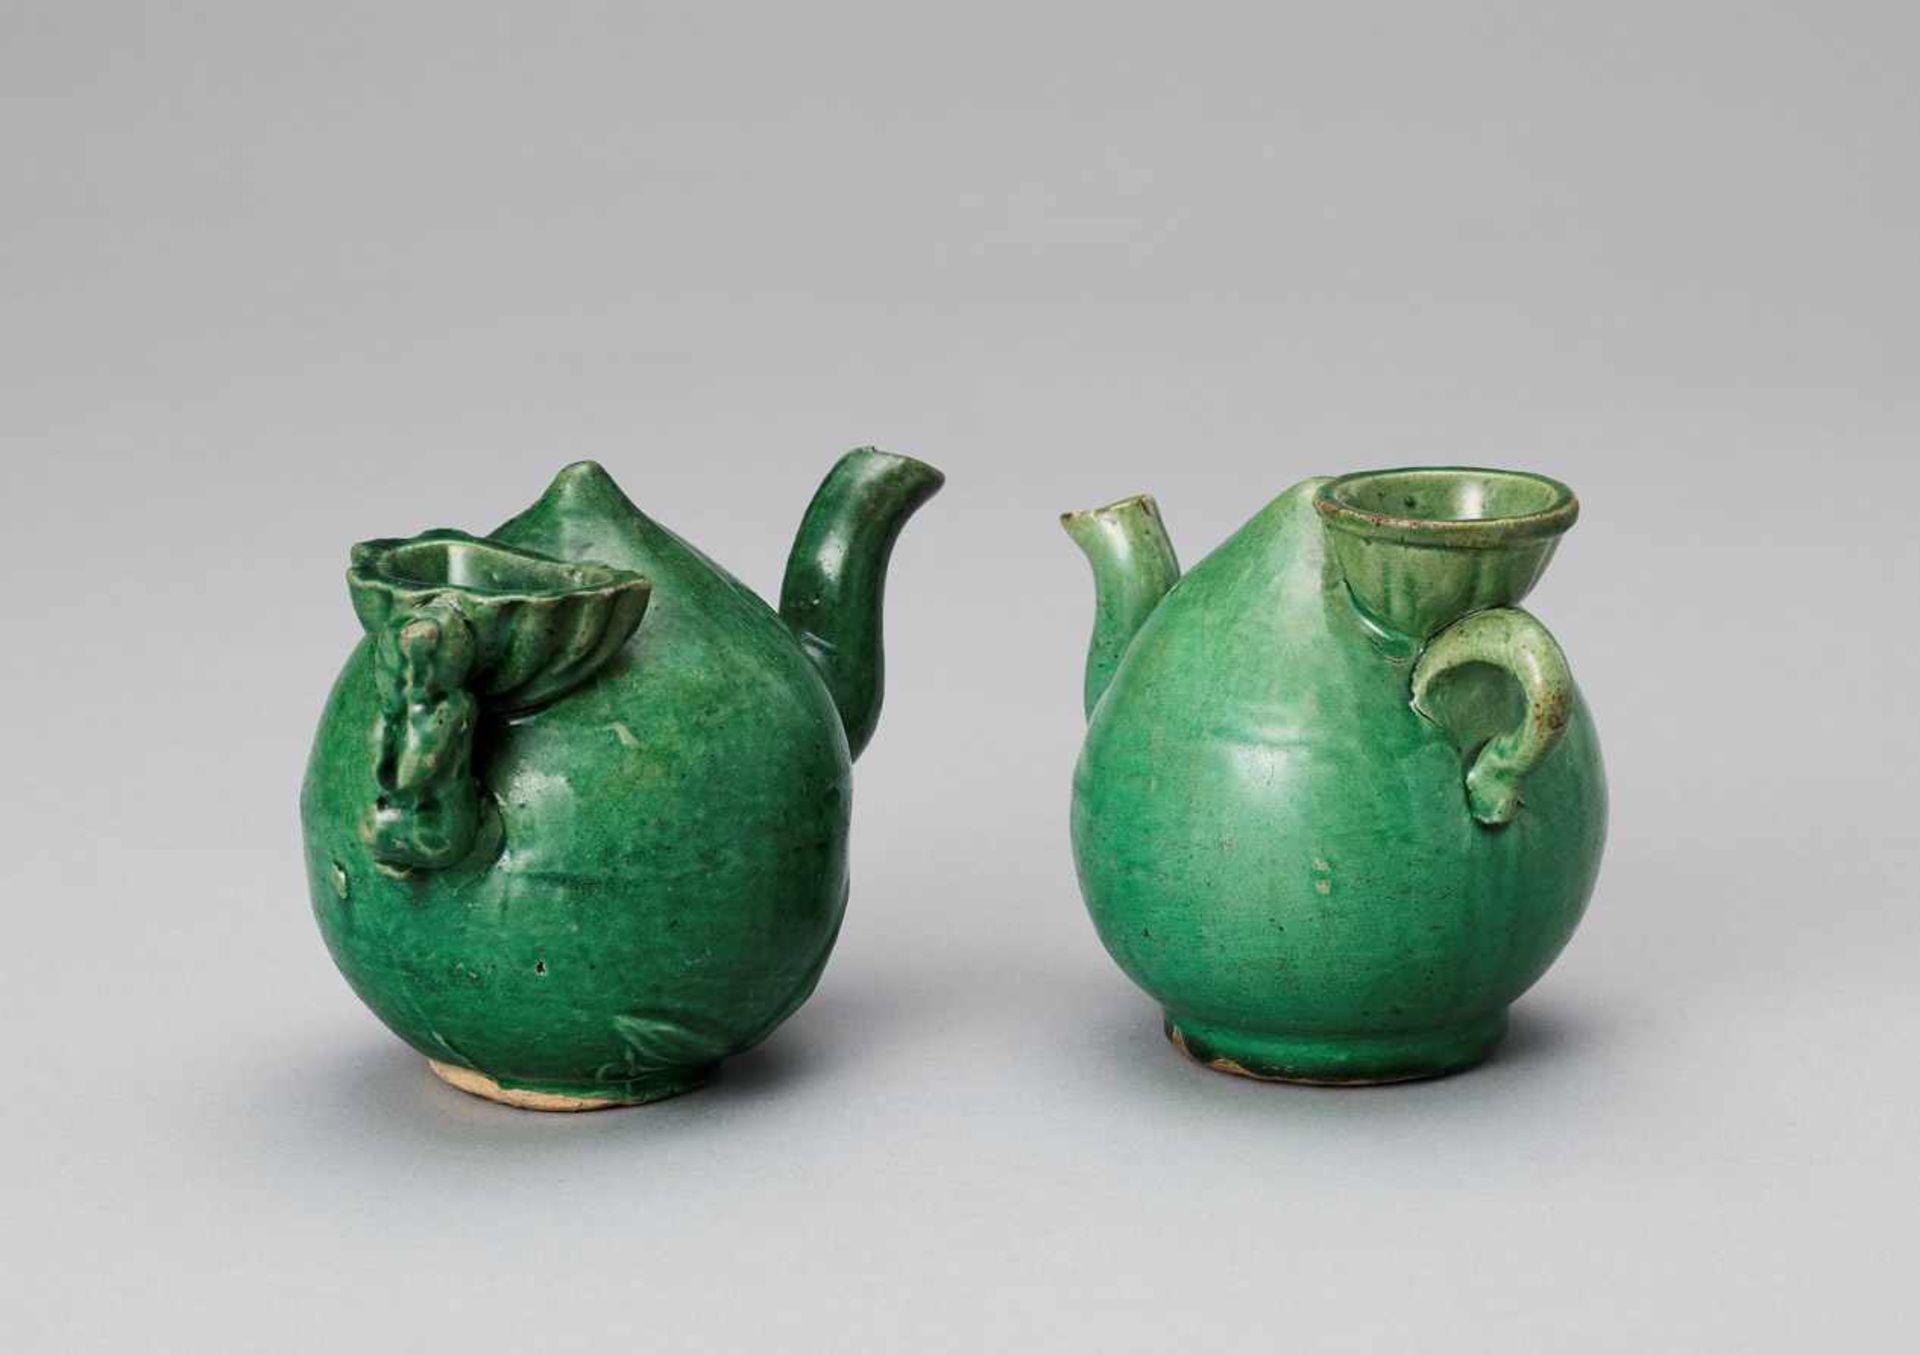 A PAIR OF EMERALD GREEN GLAZED POTTERY PEACH FORM WATER DROPPERS, KANGXI - Image 4 of 8